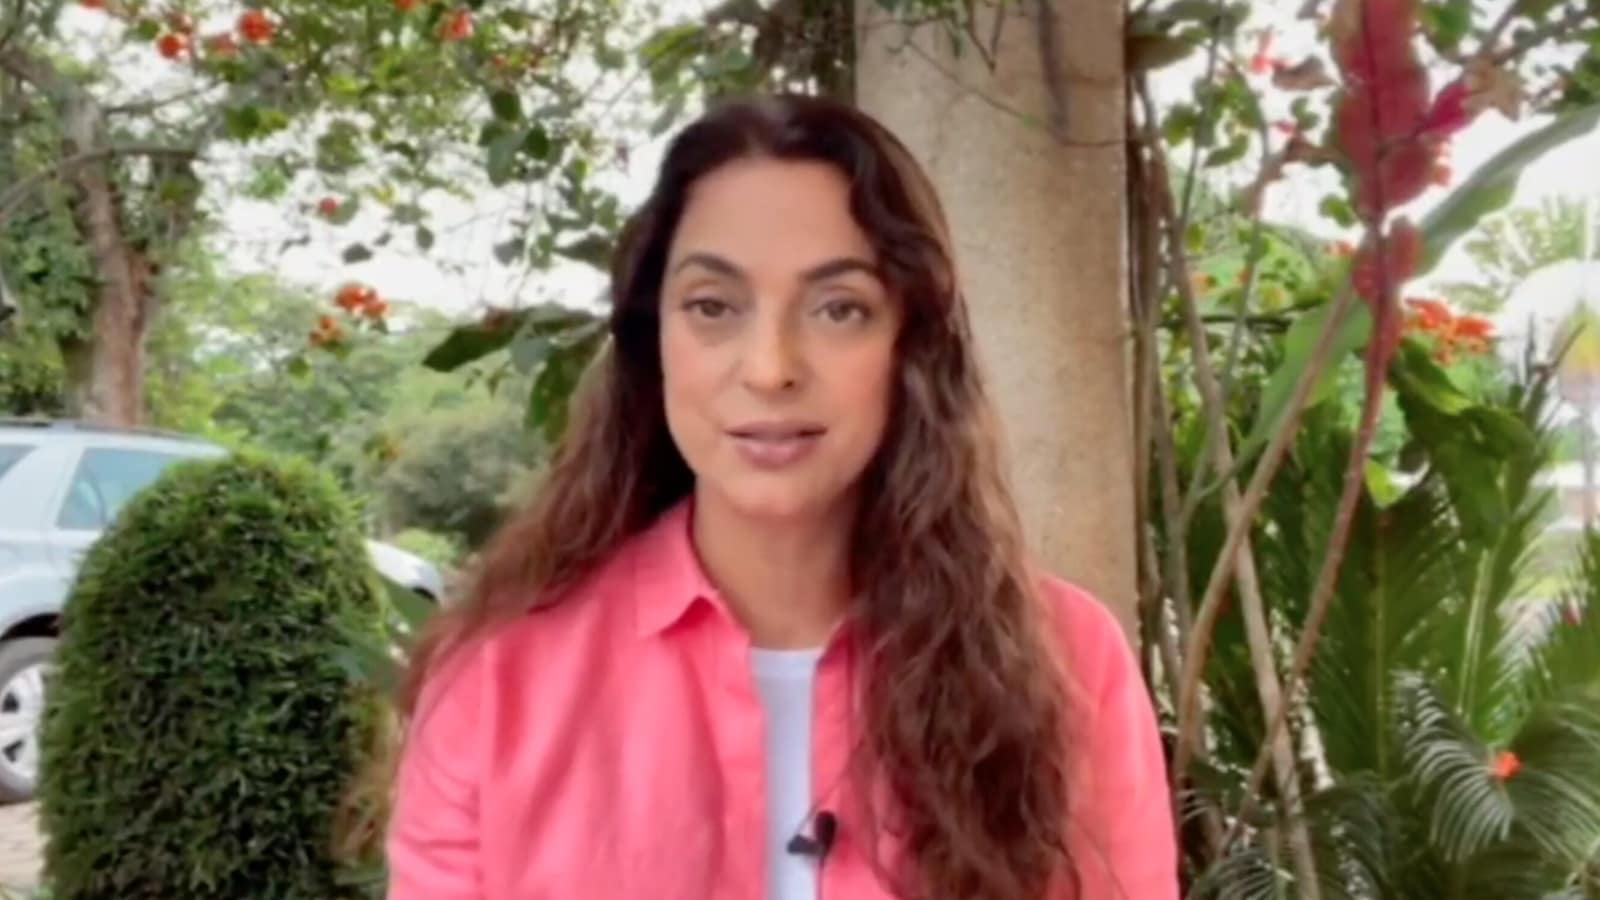 Juhi Chawla breaks silence, shares video on fight against 5G tech: 'I'll  let you decide if it was publicity stunt' | Bollywood - Hindustan Times